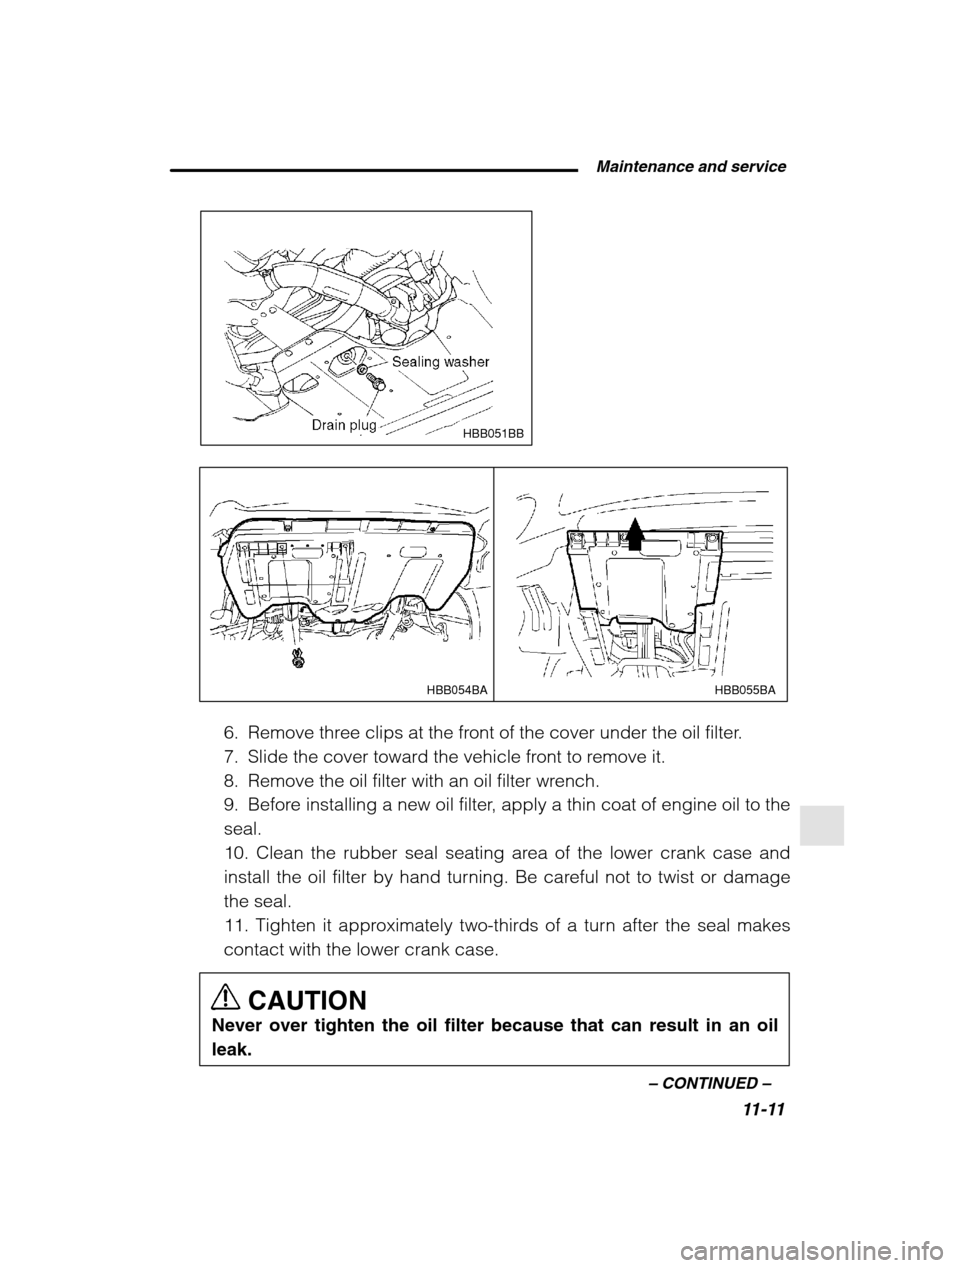 SUBARU OUTBACK 2002 3.G Owners Manual  Maintenance and service11-11
–
 CONTINUED  –
HBB051BB
HBB055BA
HBB054BA
6. Remove three clips at the front of the cover under the oil filter. 
7. Slide the cover toward the vehicle front to remov